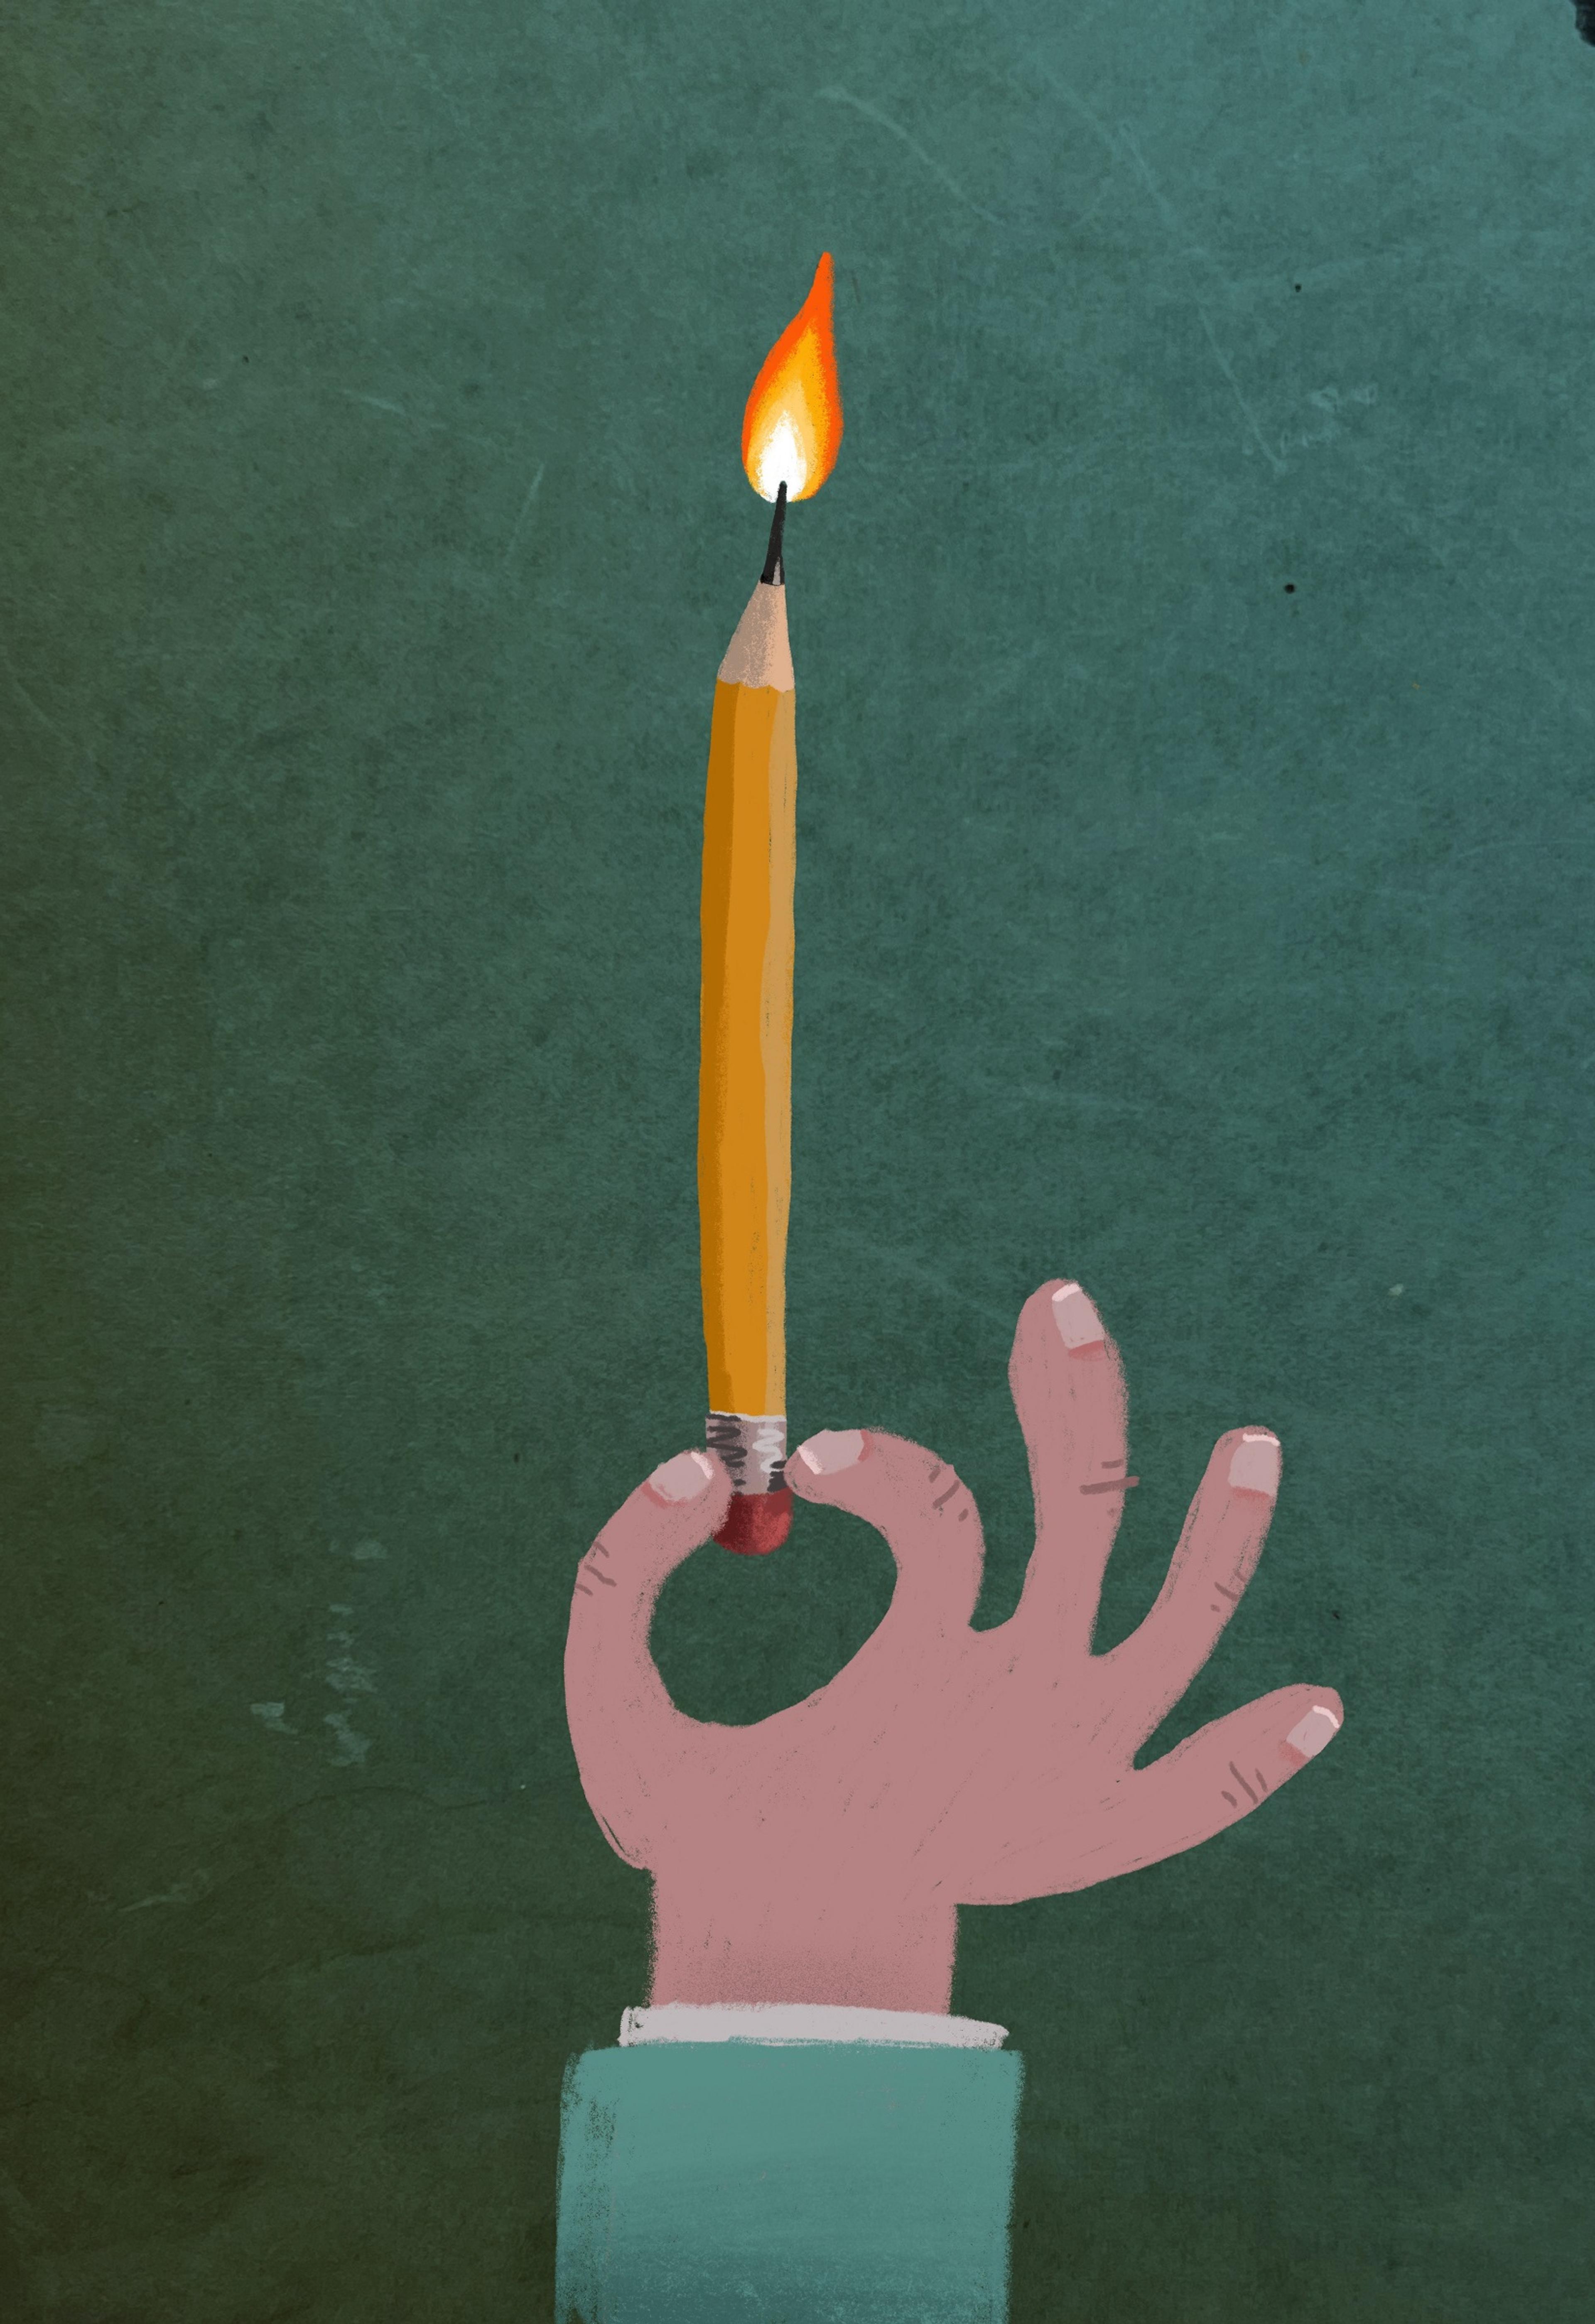 Illustration of a hand holding a pencil, lit at one end like a candle